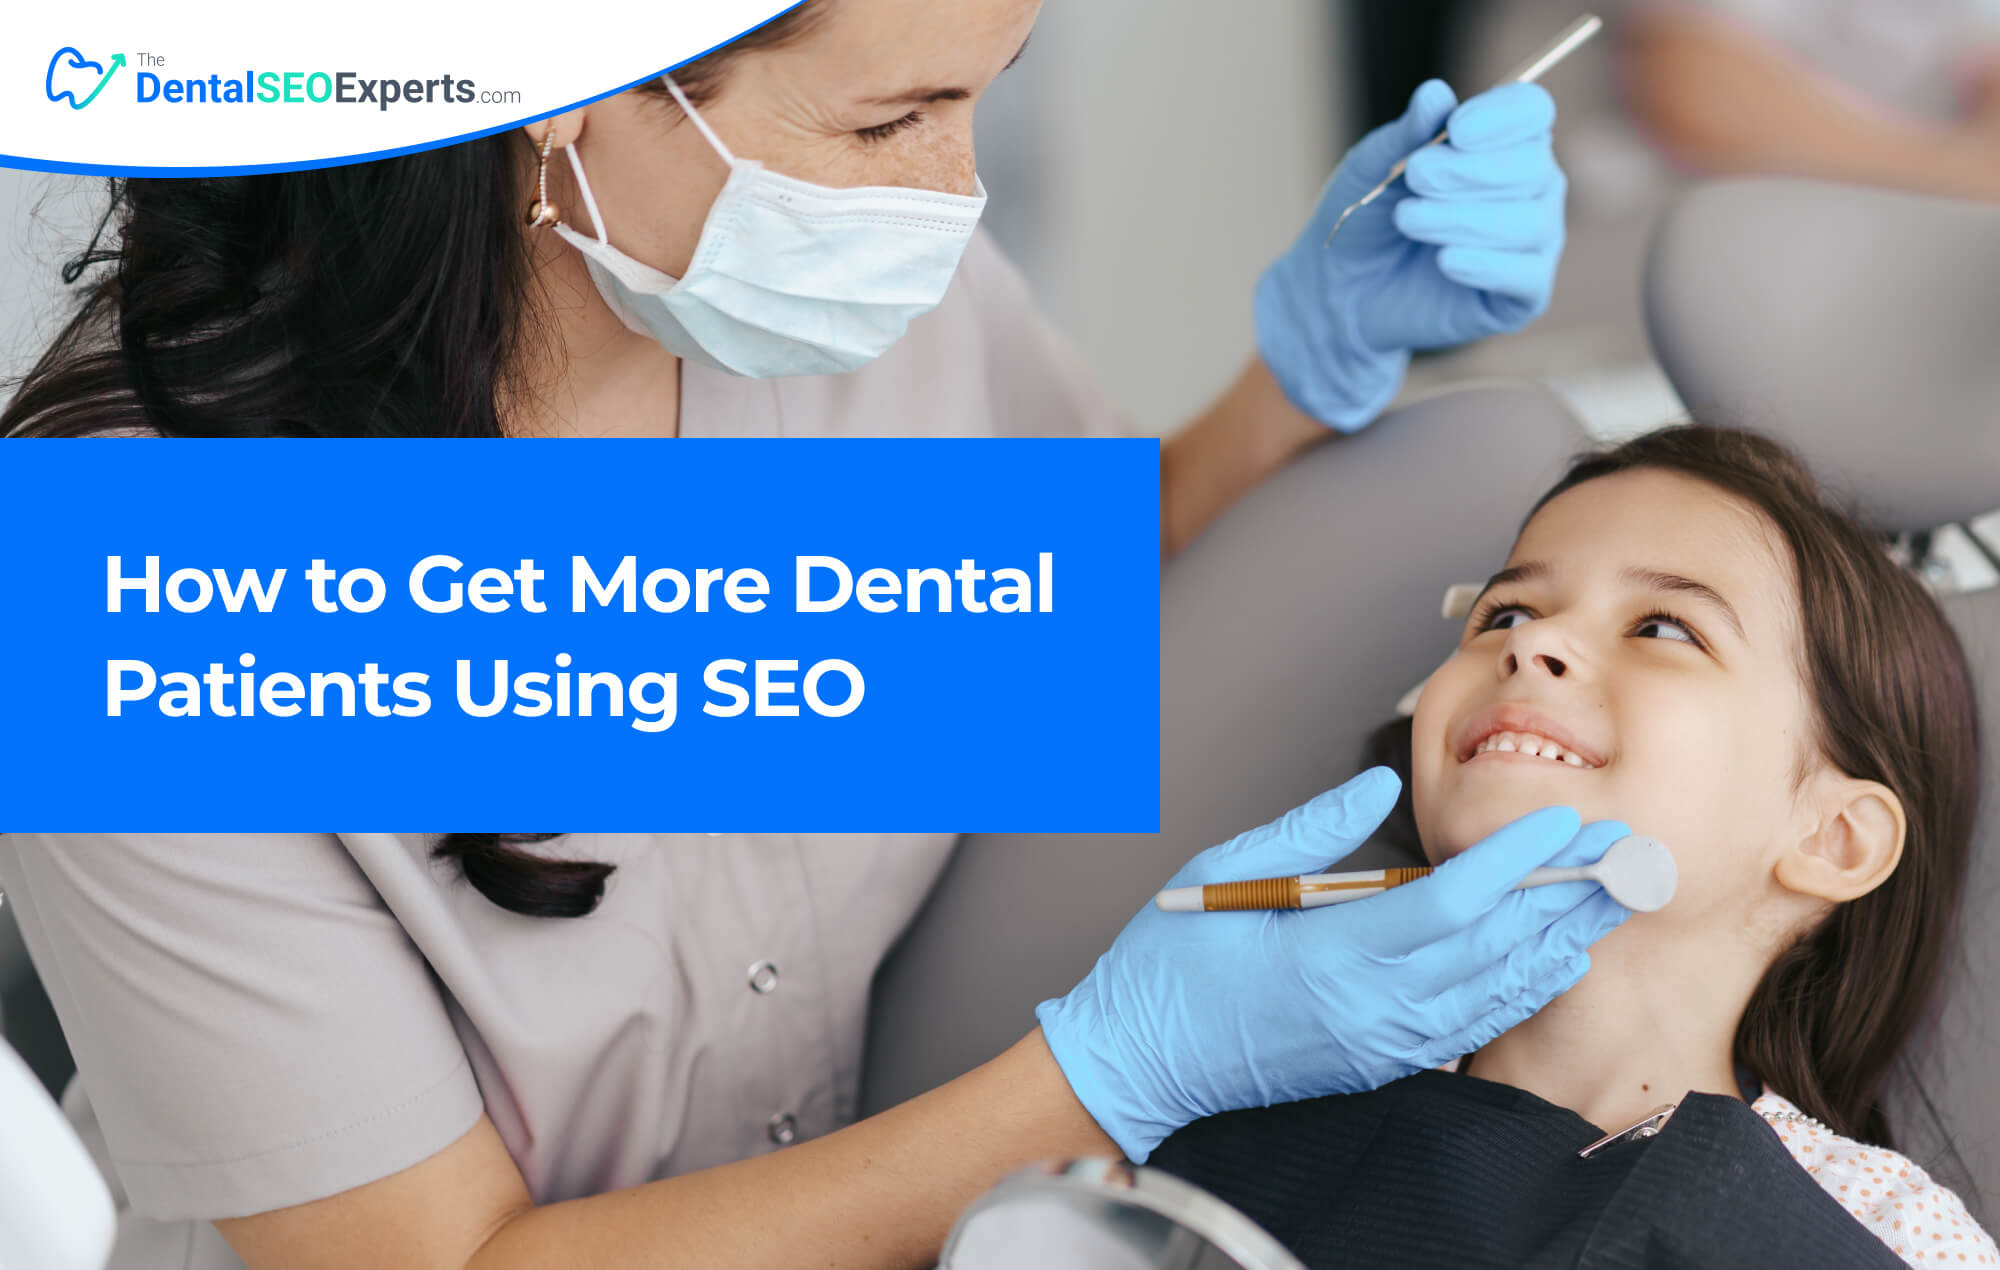 How to Get More Dental Patients Using SEO